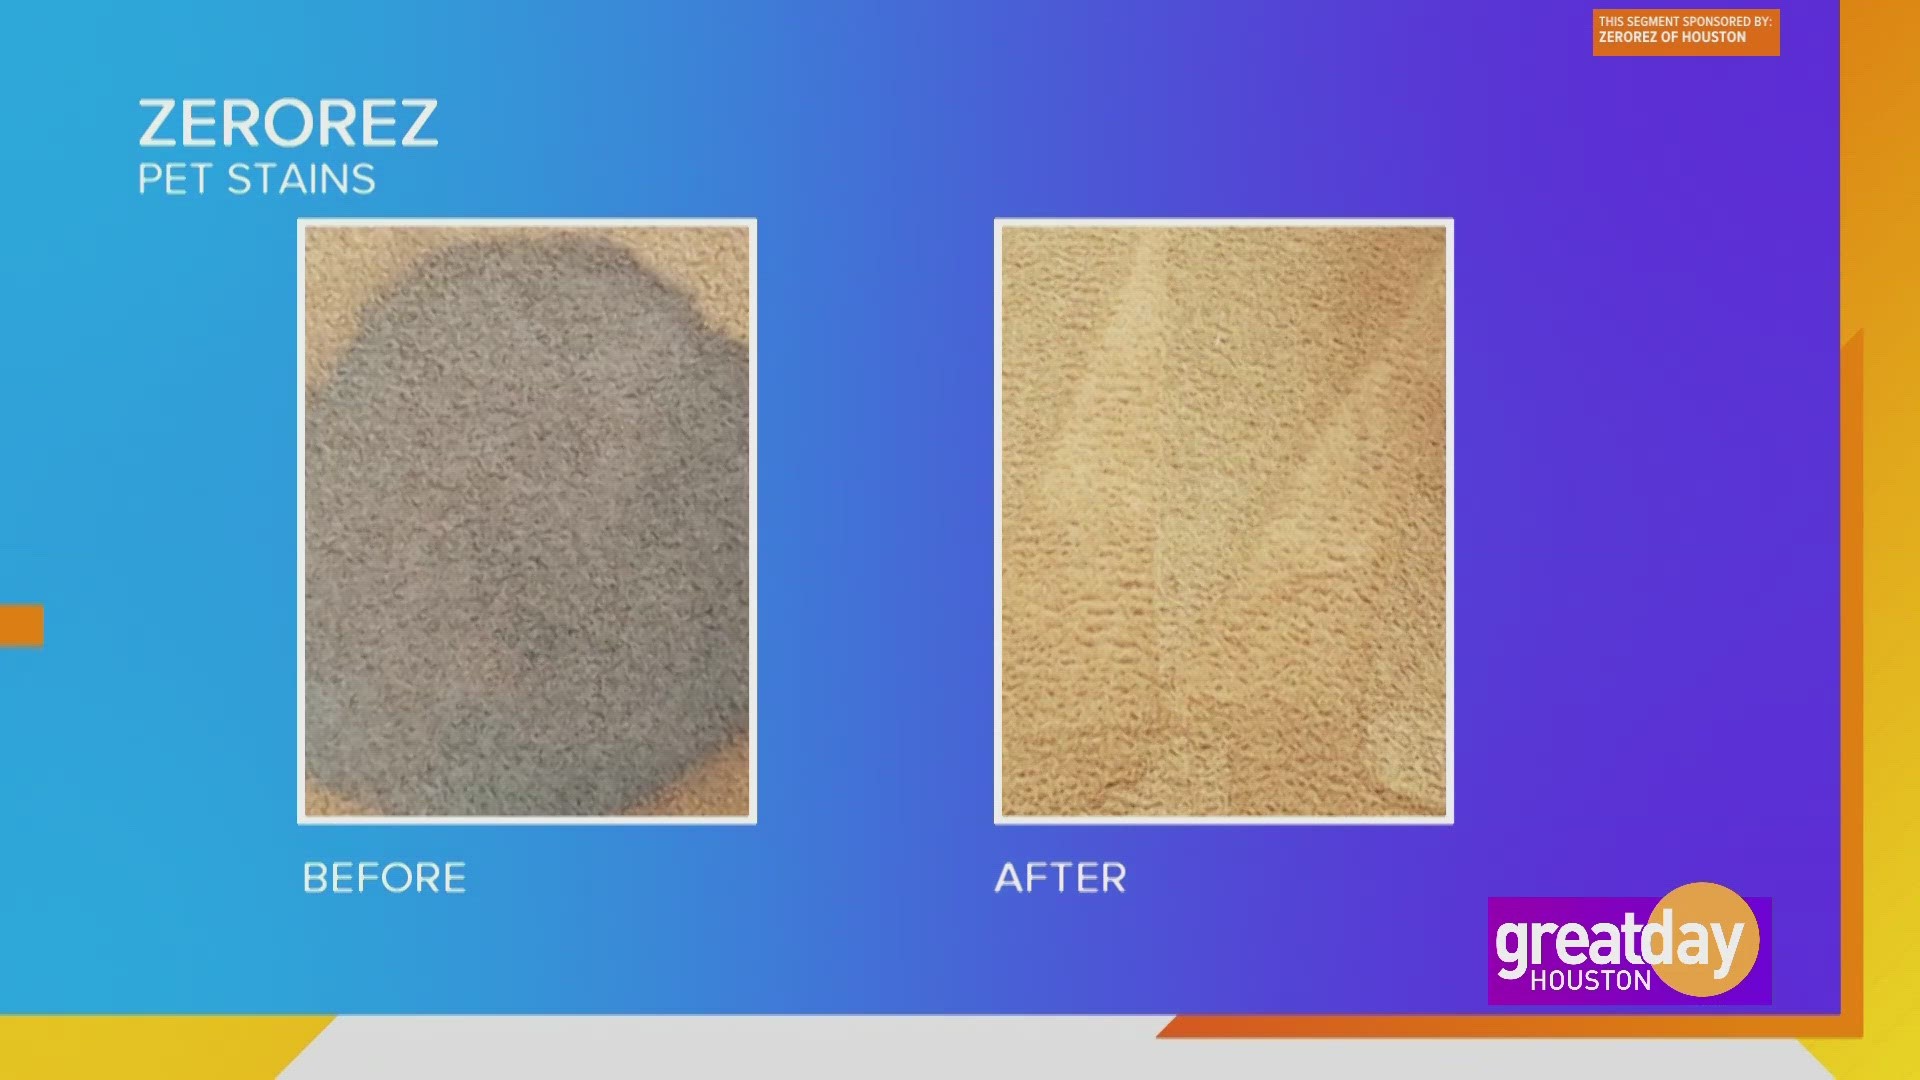 Kyle Peterson, General Manager of Zerorez of Houston, shows how Zerorez can clean your floors without toxic chemicals or detergents, leaving carpets residue free.